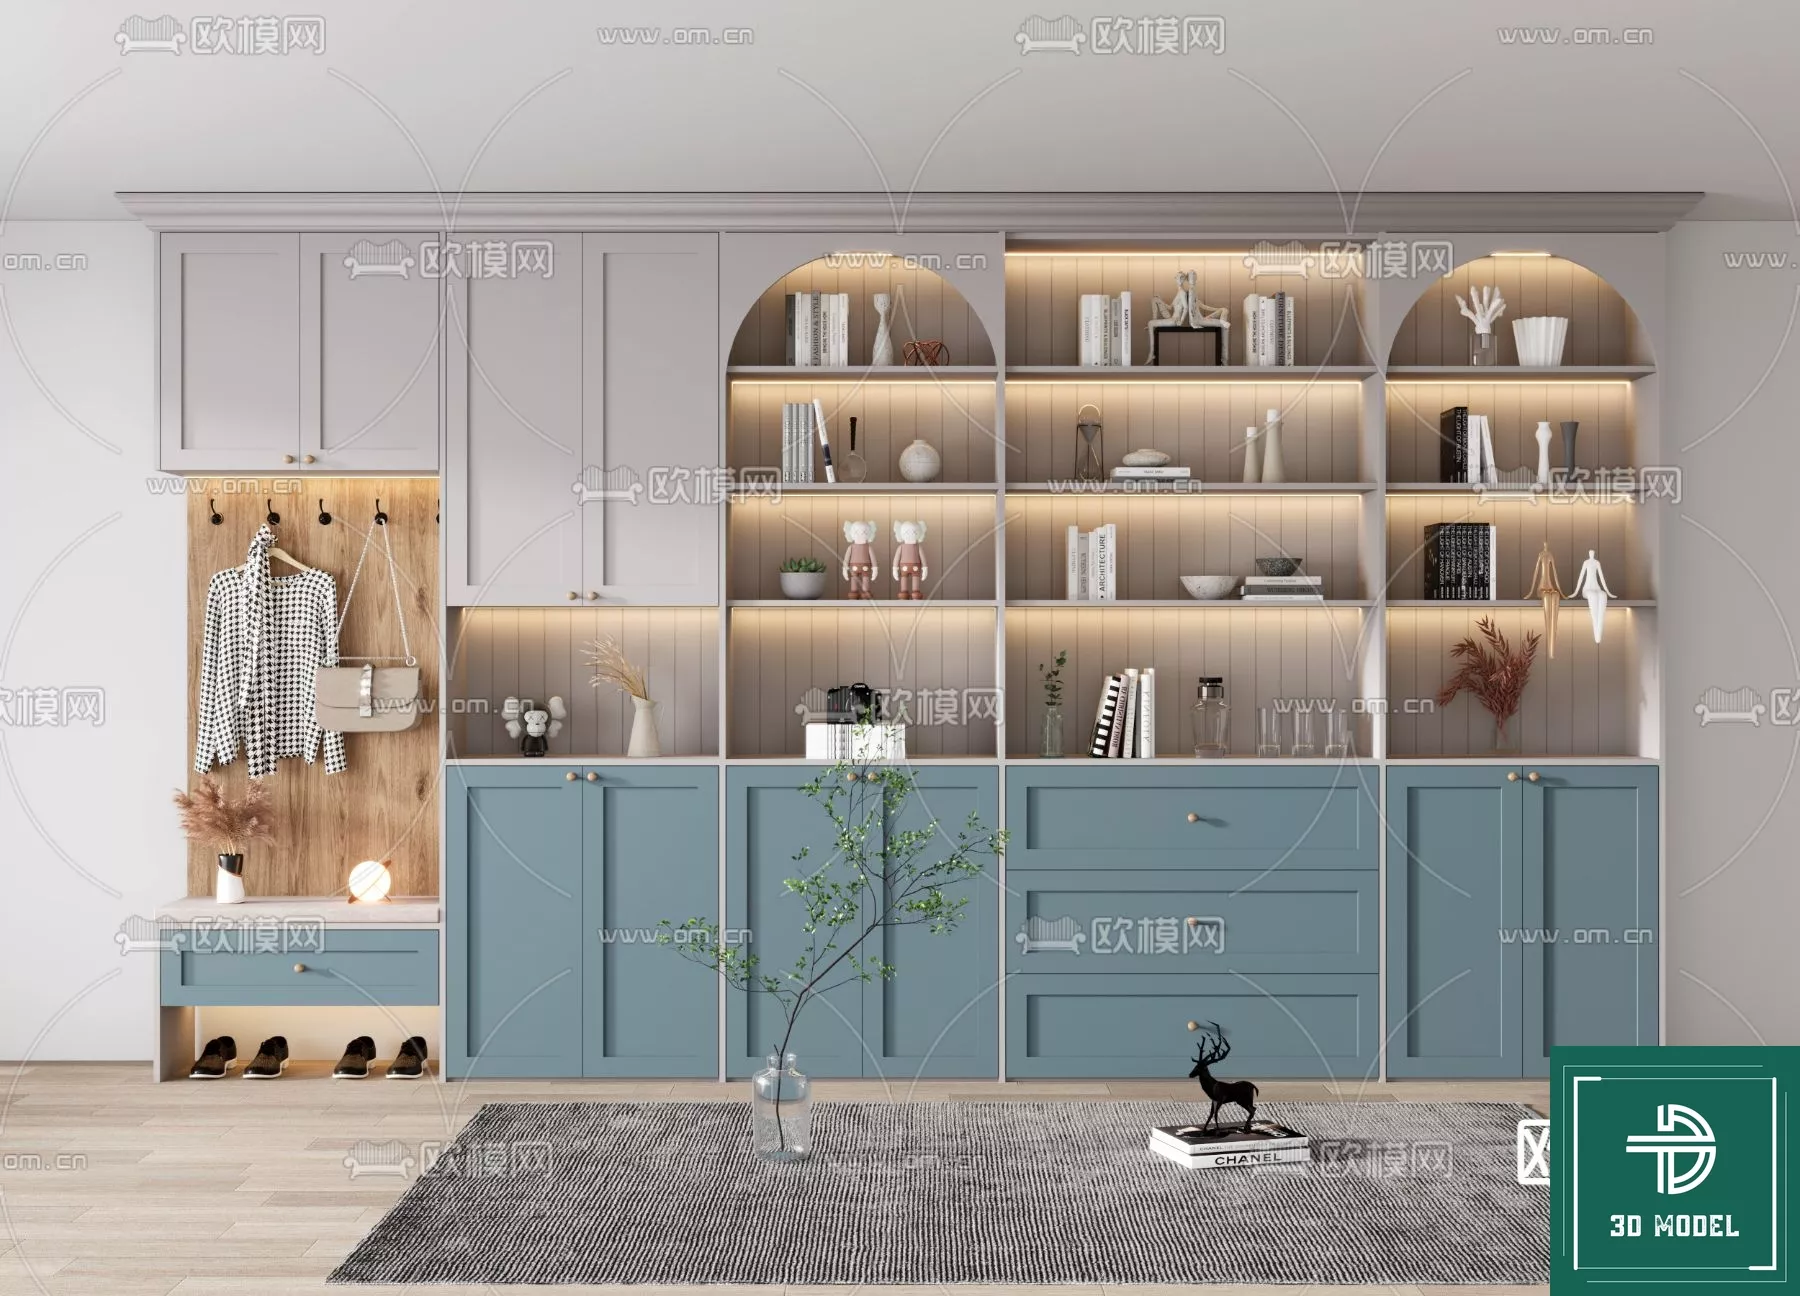 MODERN SHOES CABINET - SKETCHUP 3D MODEL - VRAY OR ENSCAPE - ID12812